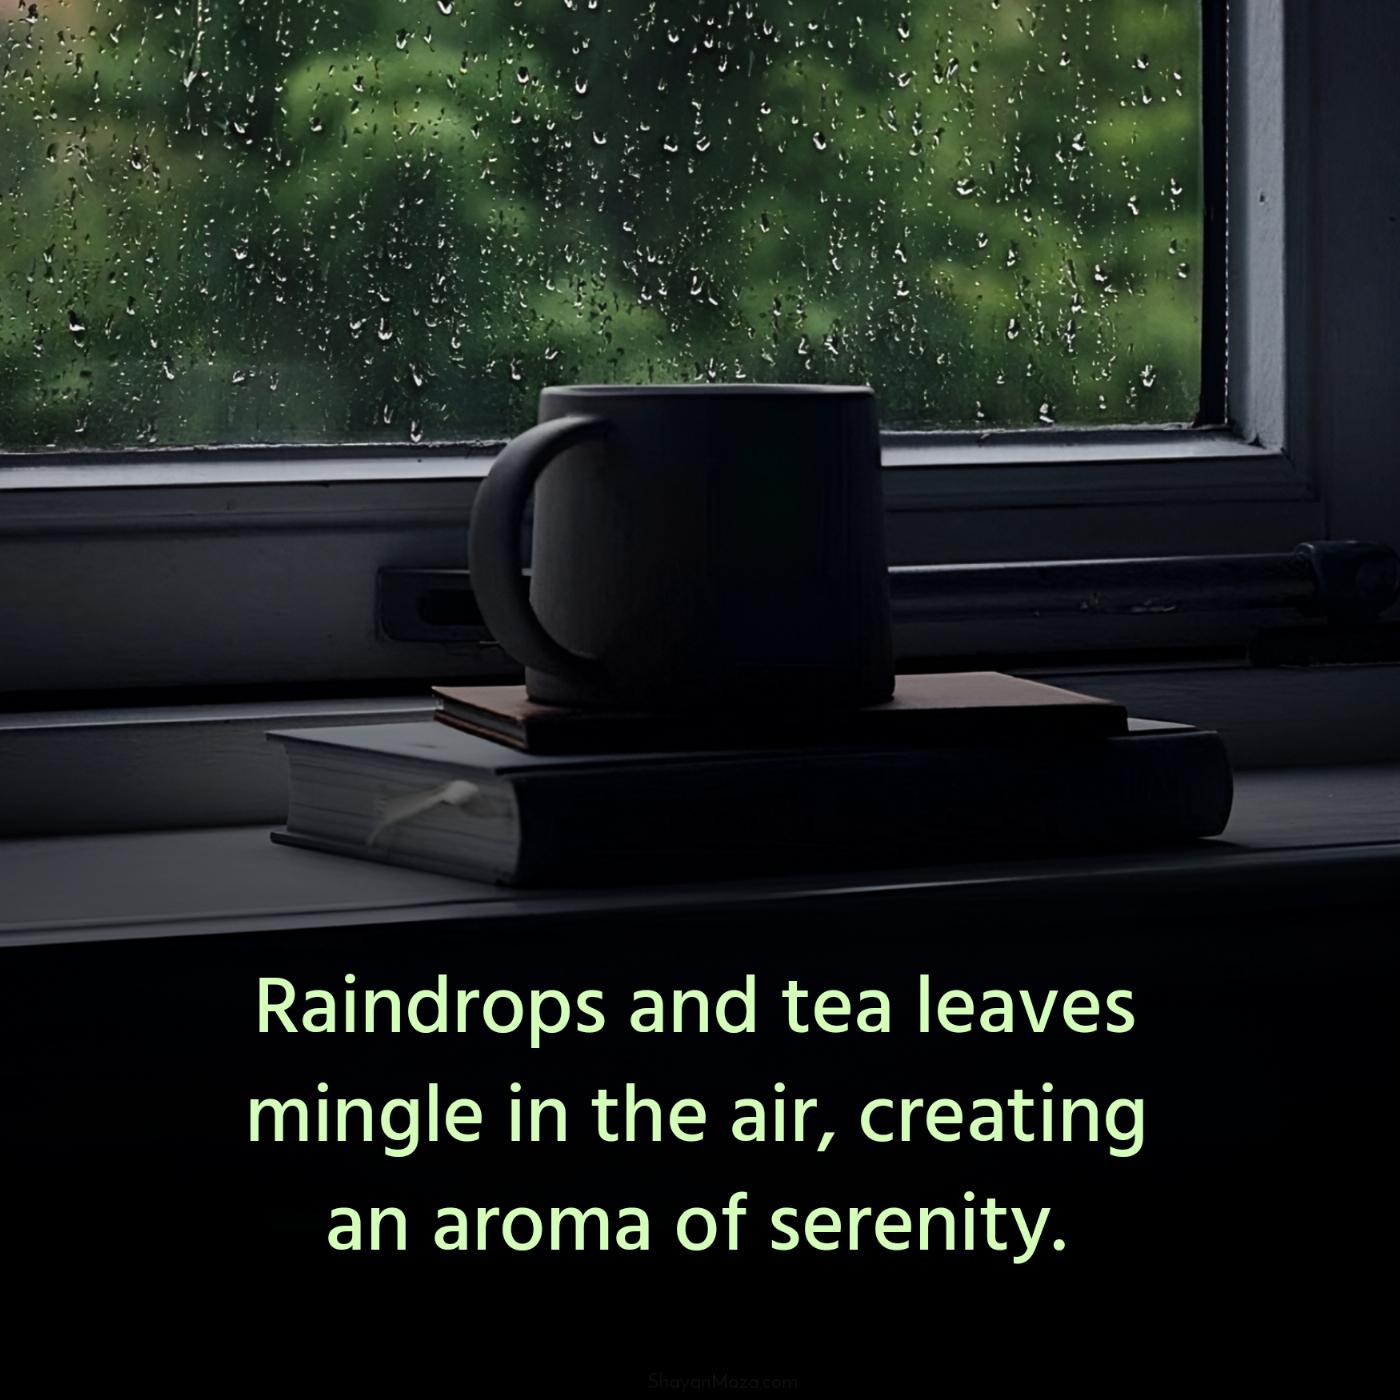 Raindrops and tea leaves mingle in the air